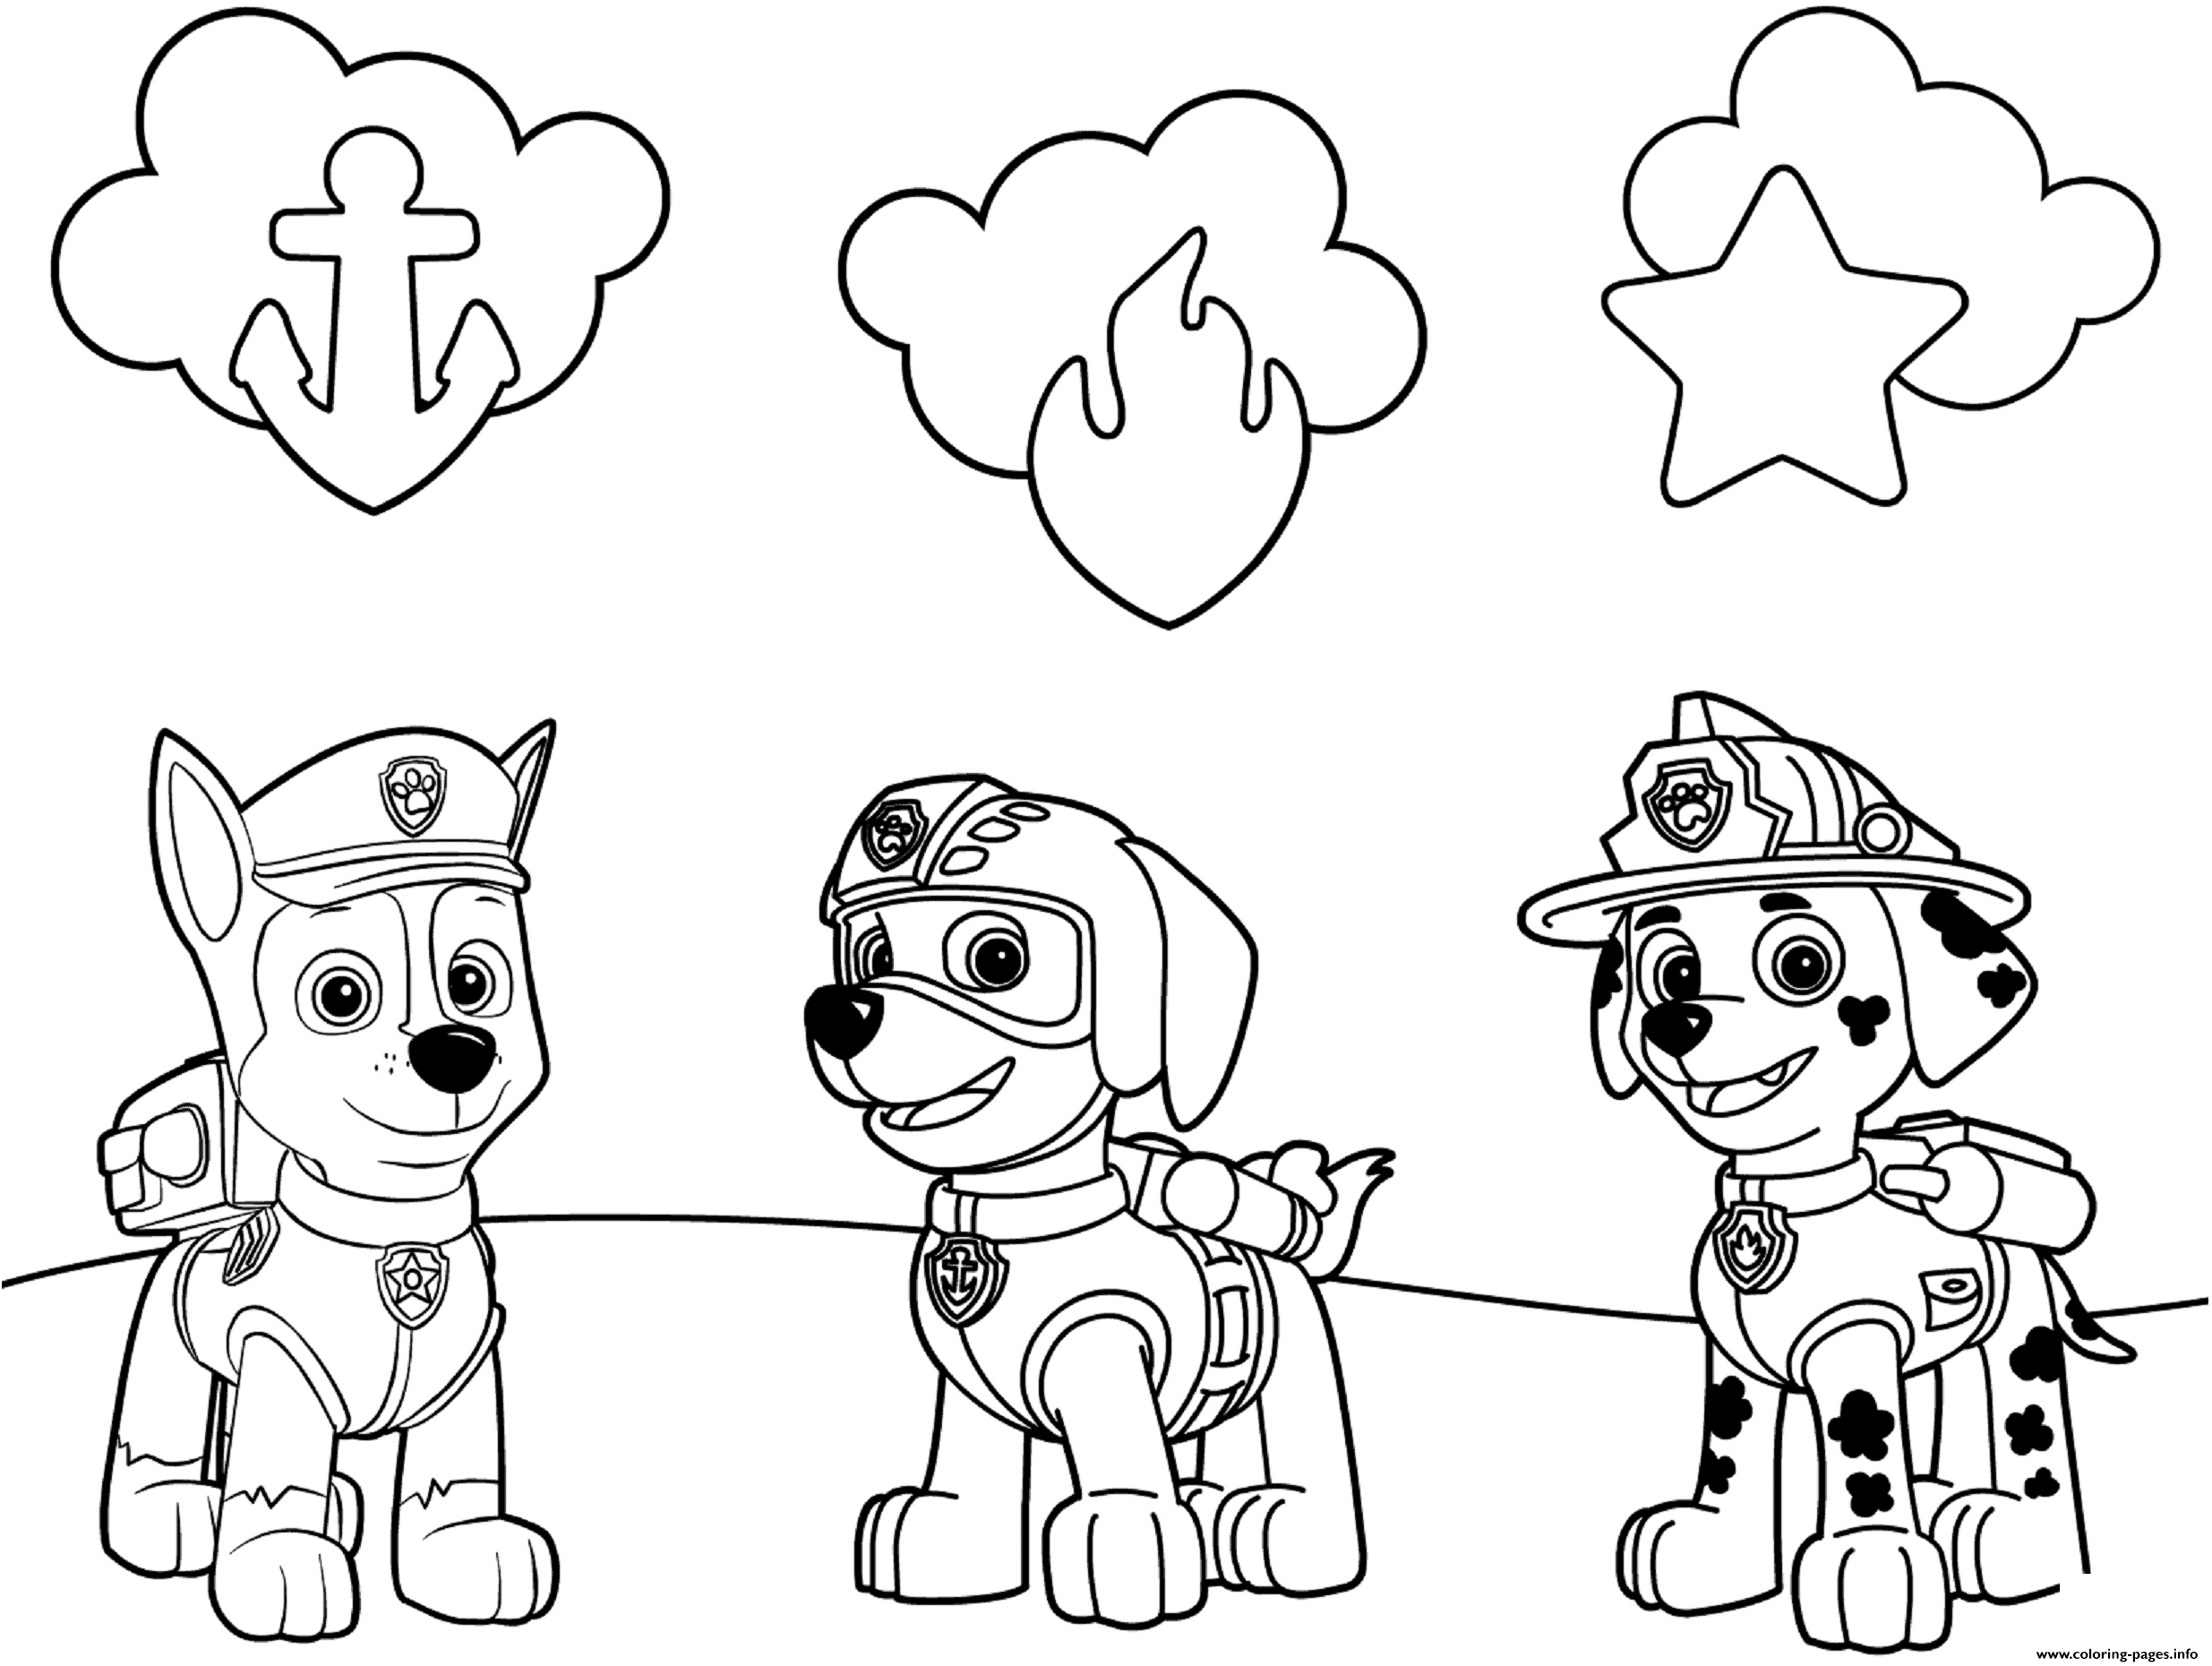 Paw Patrol Coloring Activity Book, FREE To Use